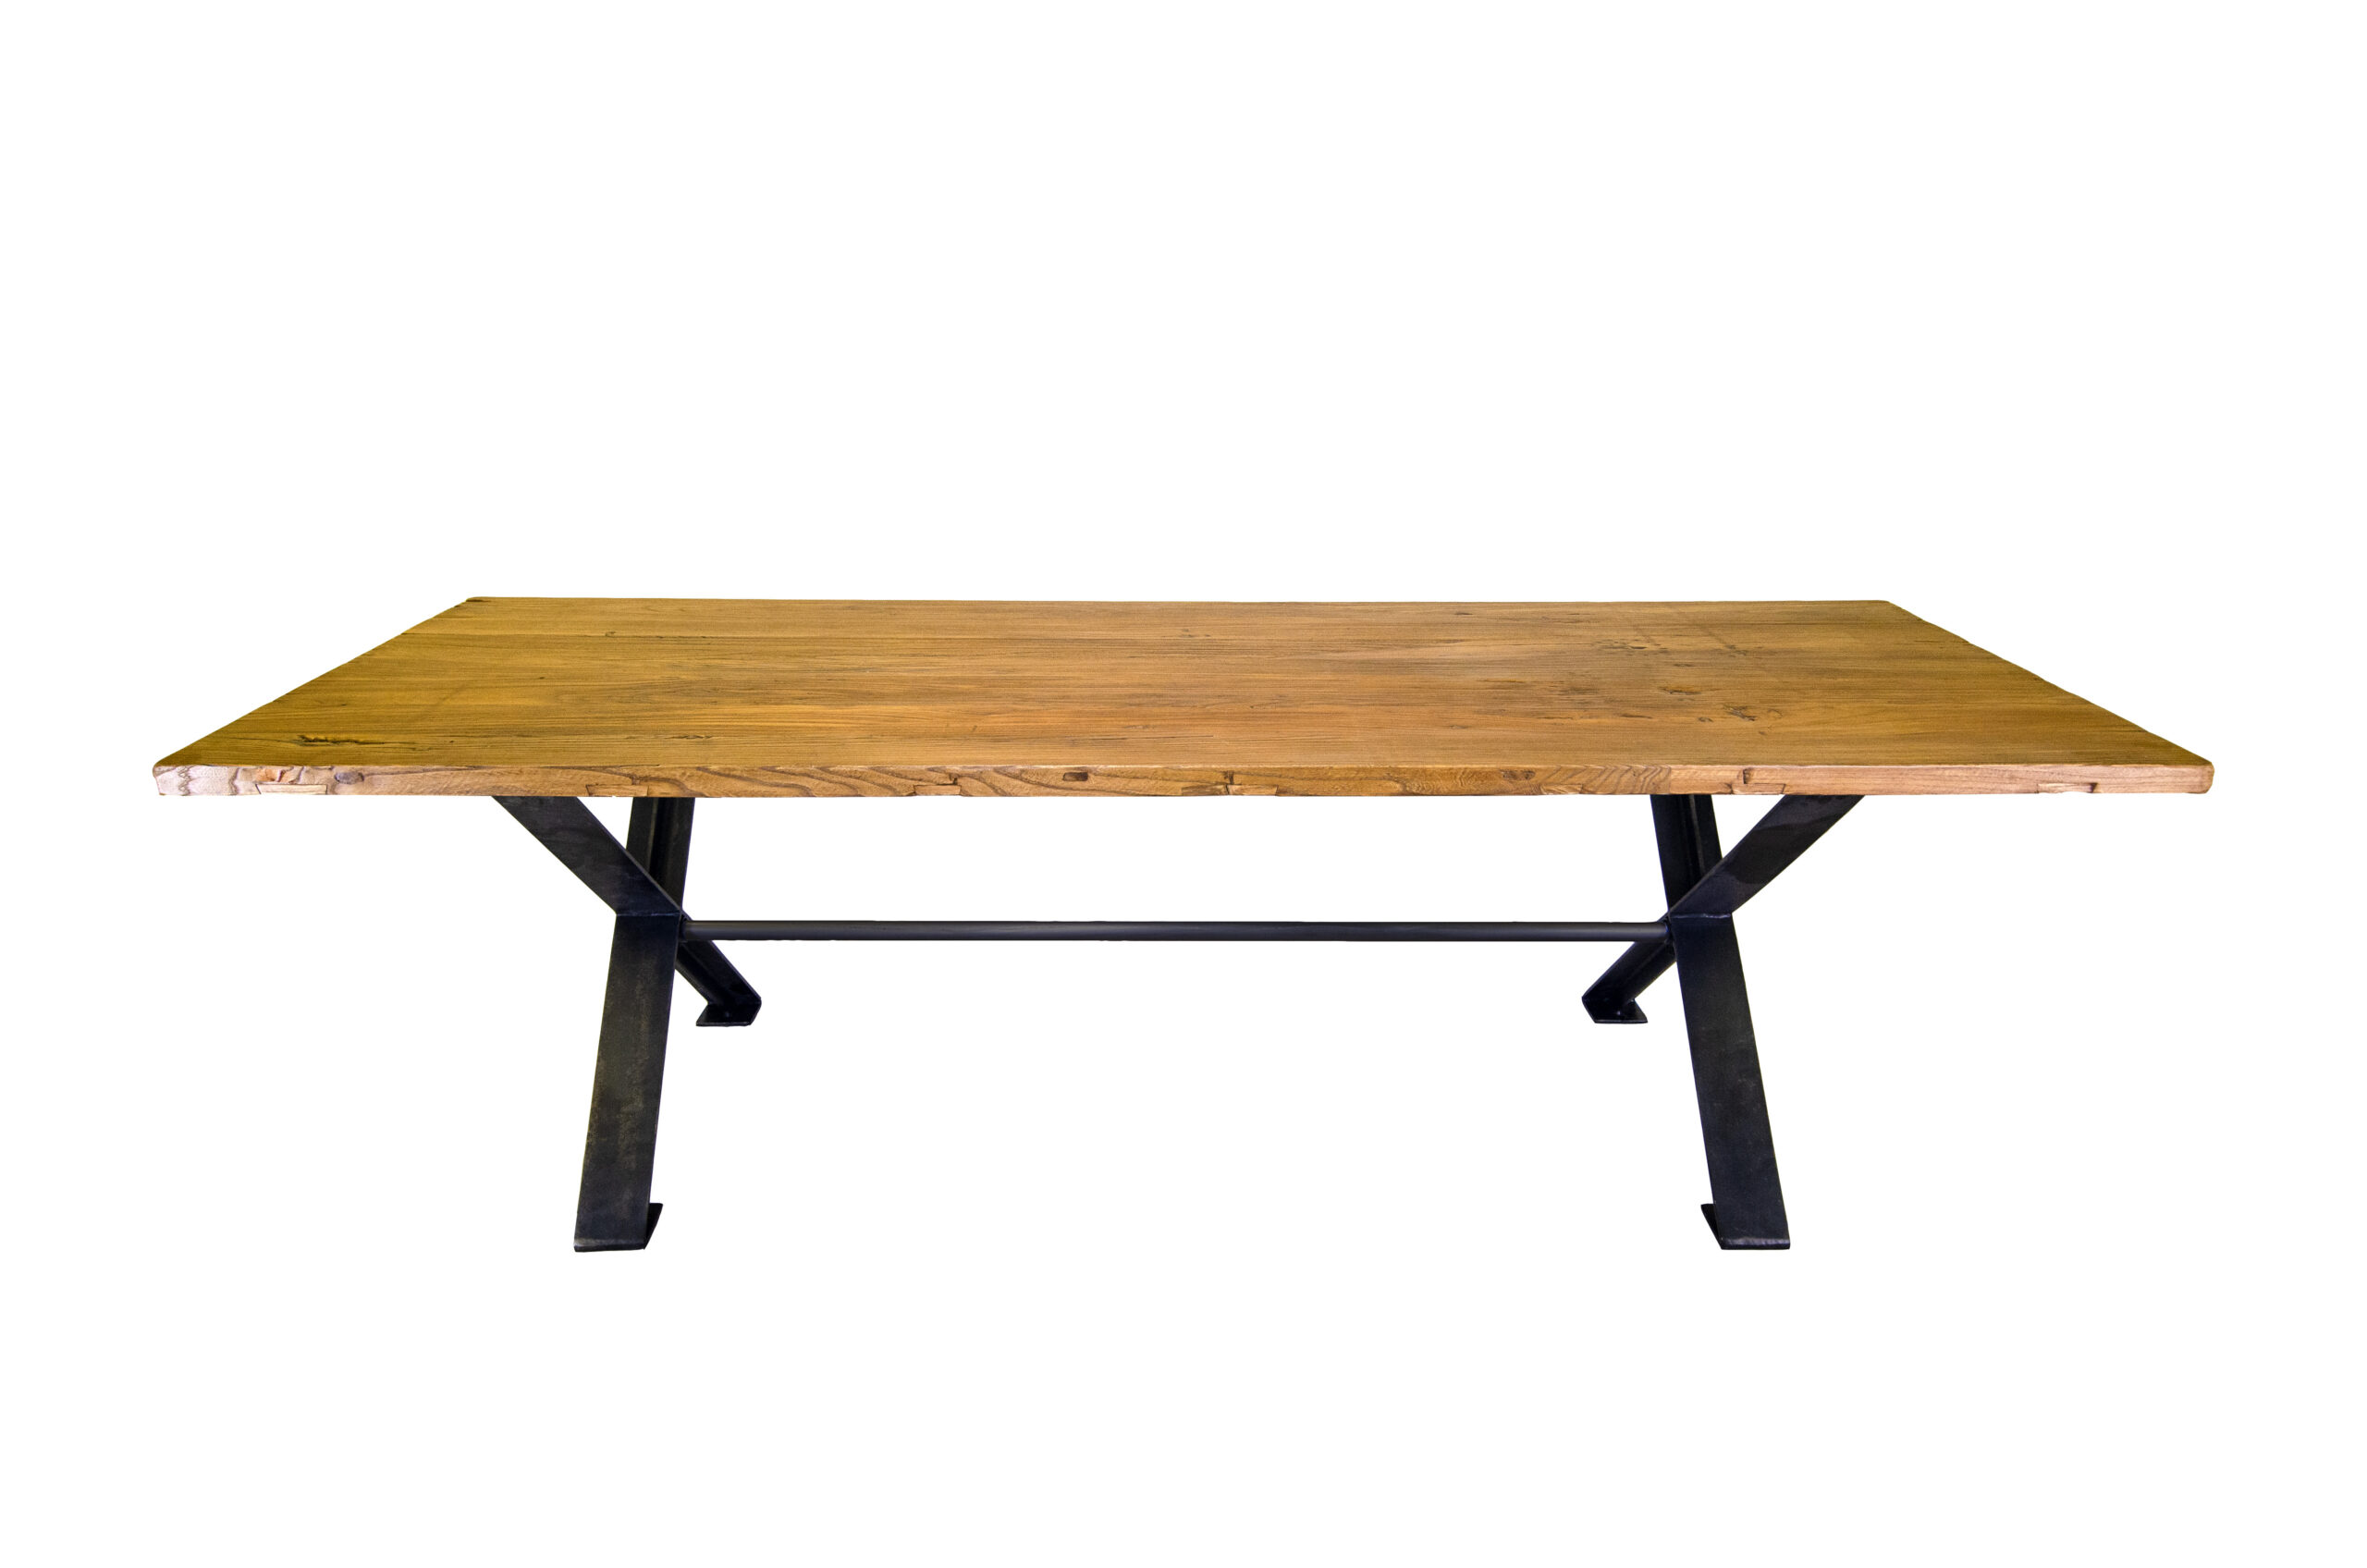 T4402: Typically 7' to 10' in length, Shown in Hazelnut Stain with Rubbed Black Steel Base